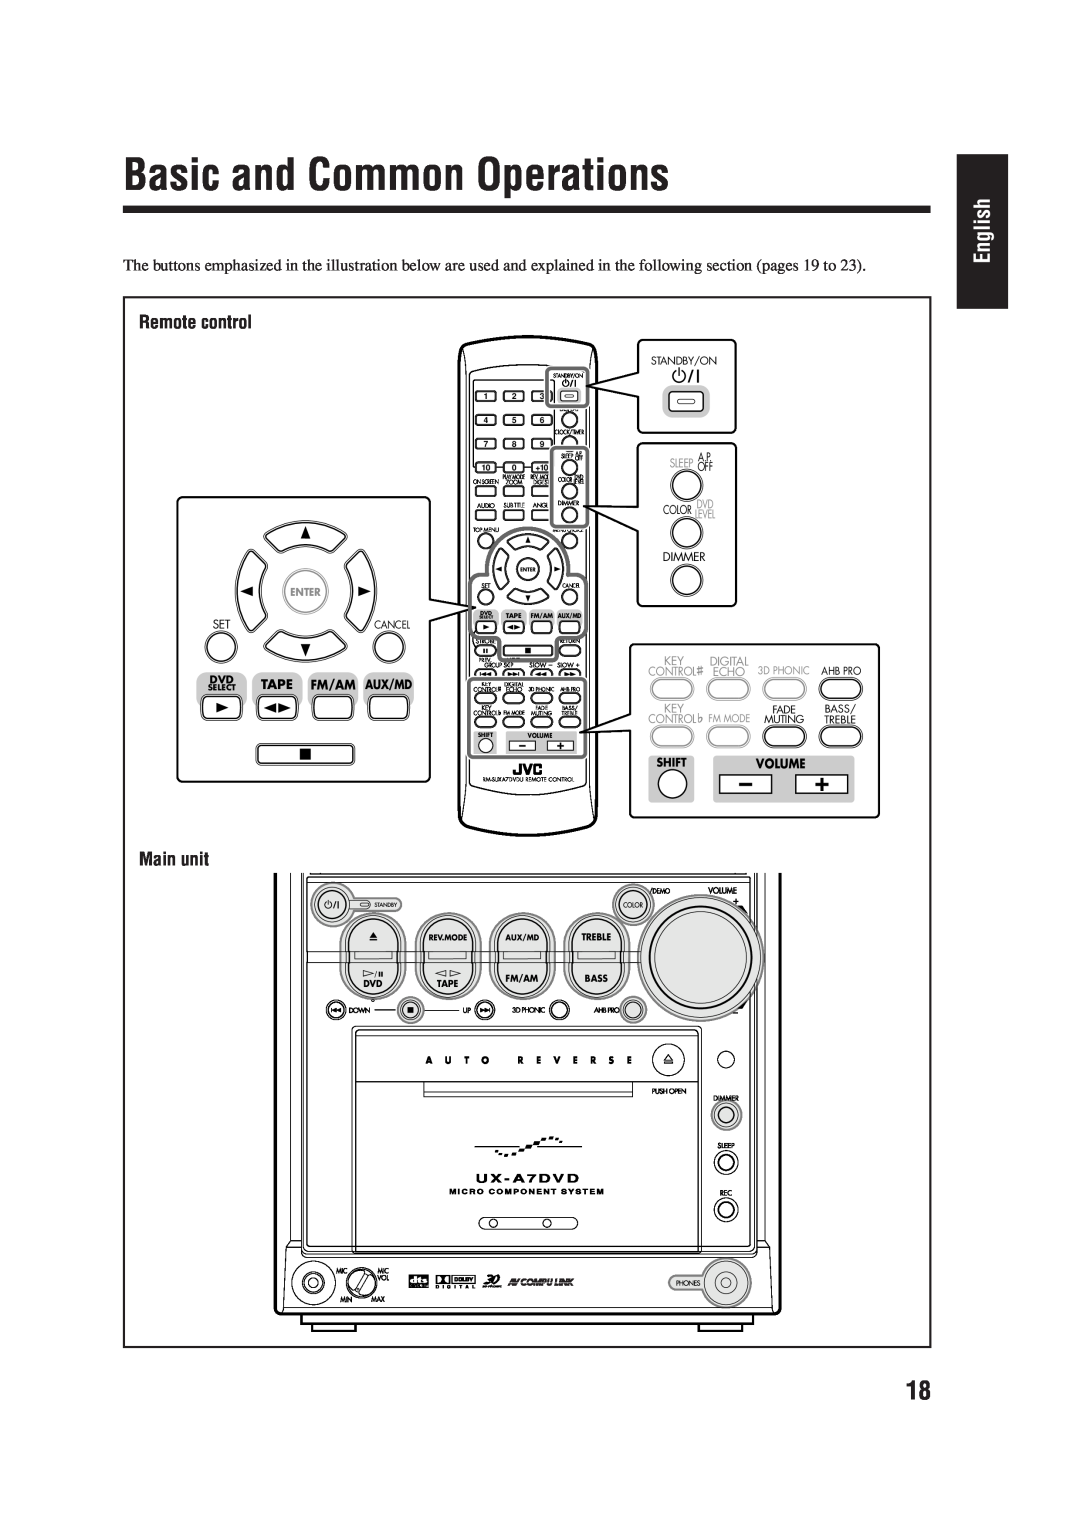 JVC LVT0954-007A Basic and Common Operations, English, Main unit, Remote control, Tape, Fm/Am, Volume, Color Level, Dimmer 